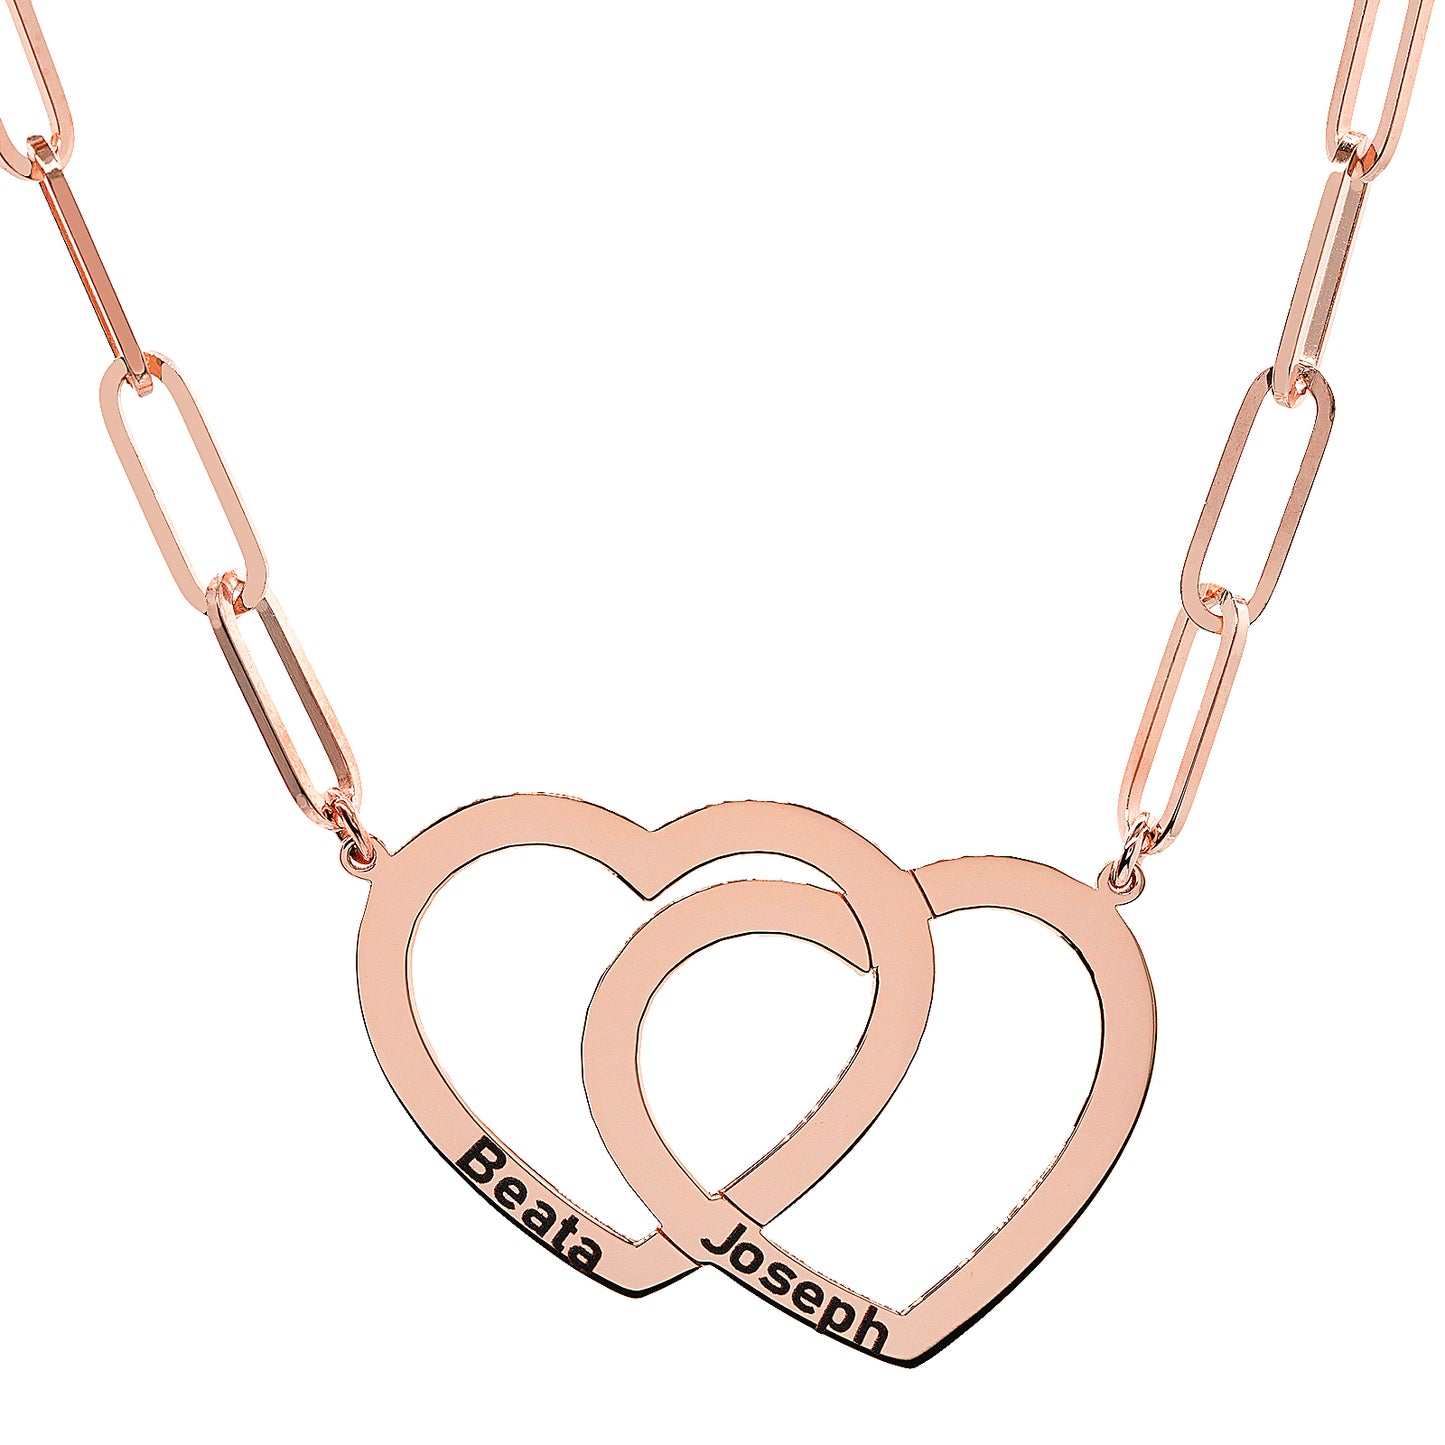 Interlocking Hearts Necklace in 14K Gold Paperclip Chain | Engravable